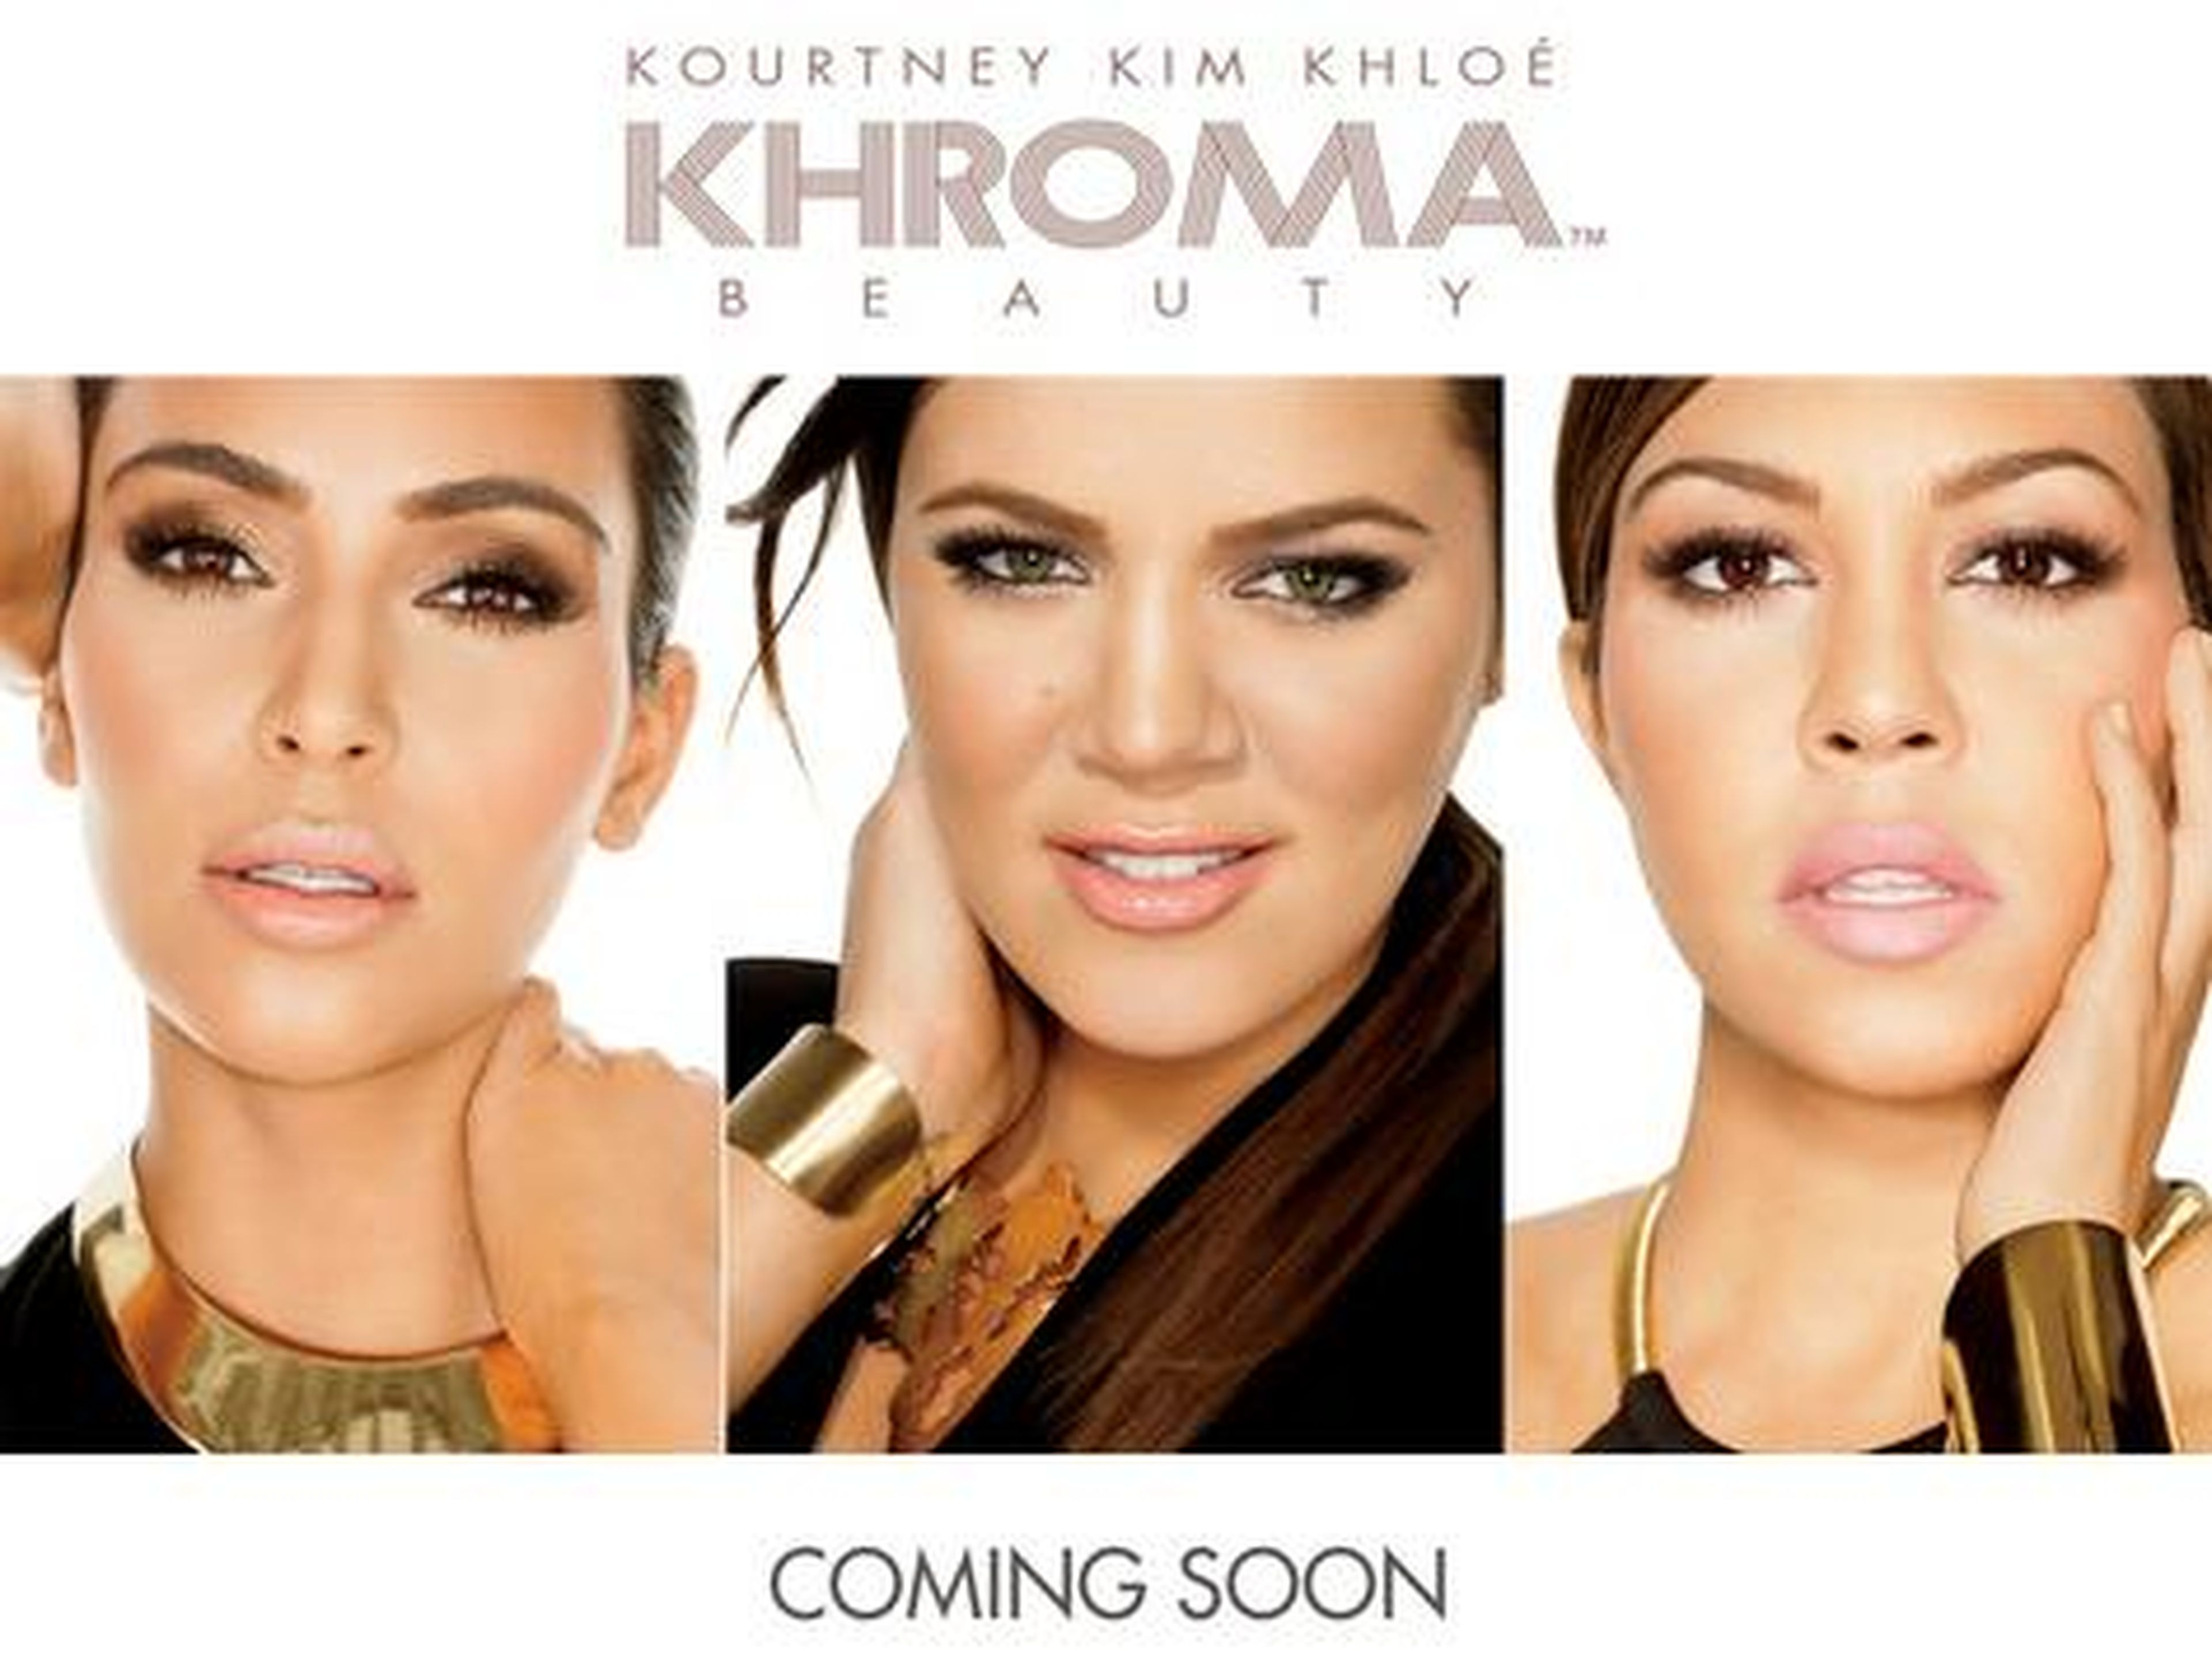 In November 2012, Kim and her sisters launched Khroma Beauty — a full range of cosmetics products.